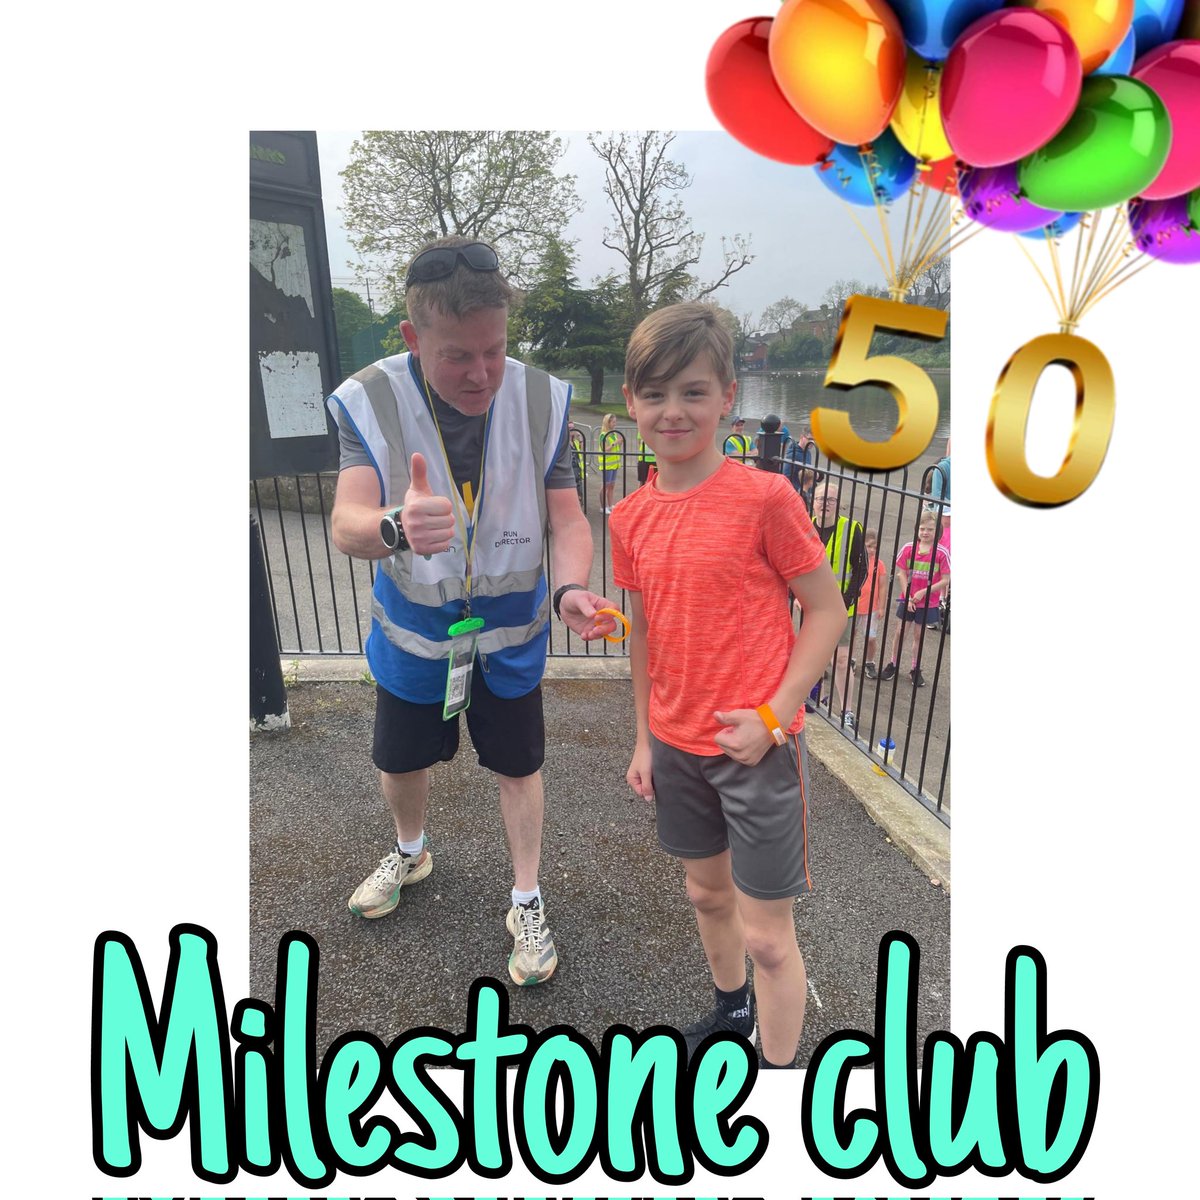 Well done to the newest member of our milestone club 👍💚 #loveparkrun #milestoneClub